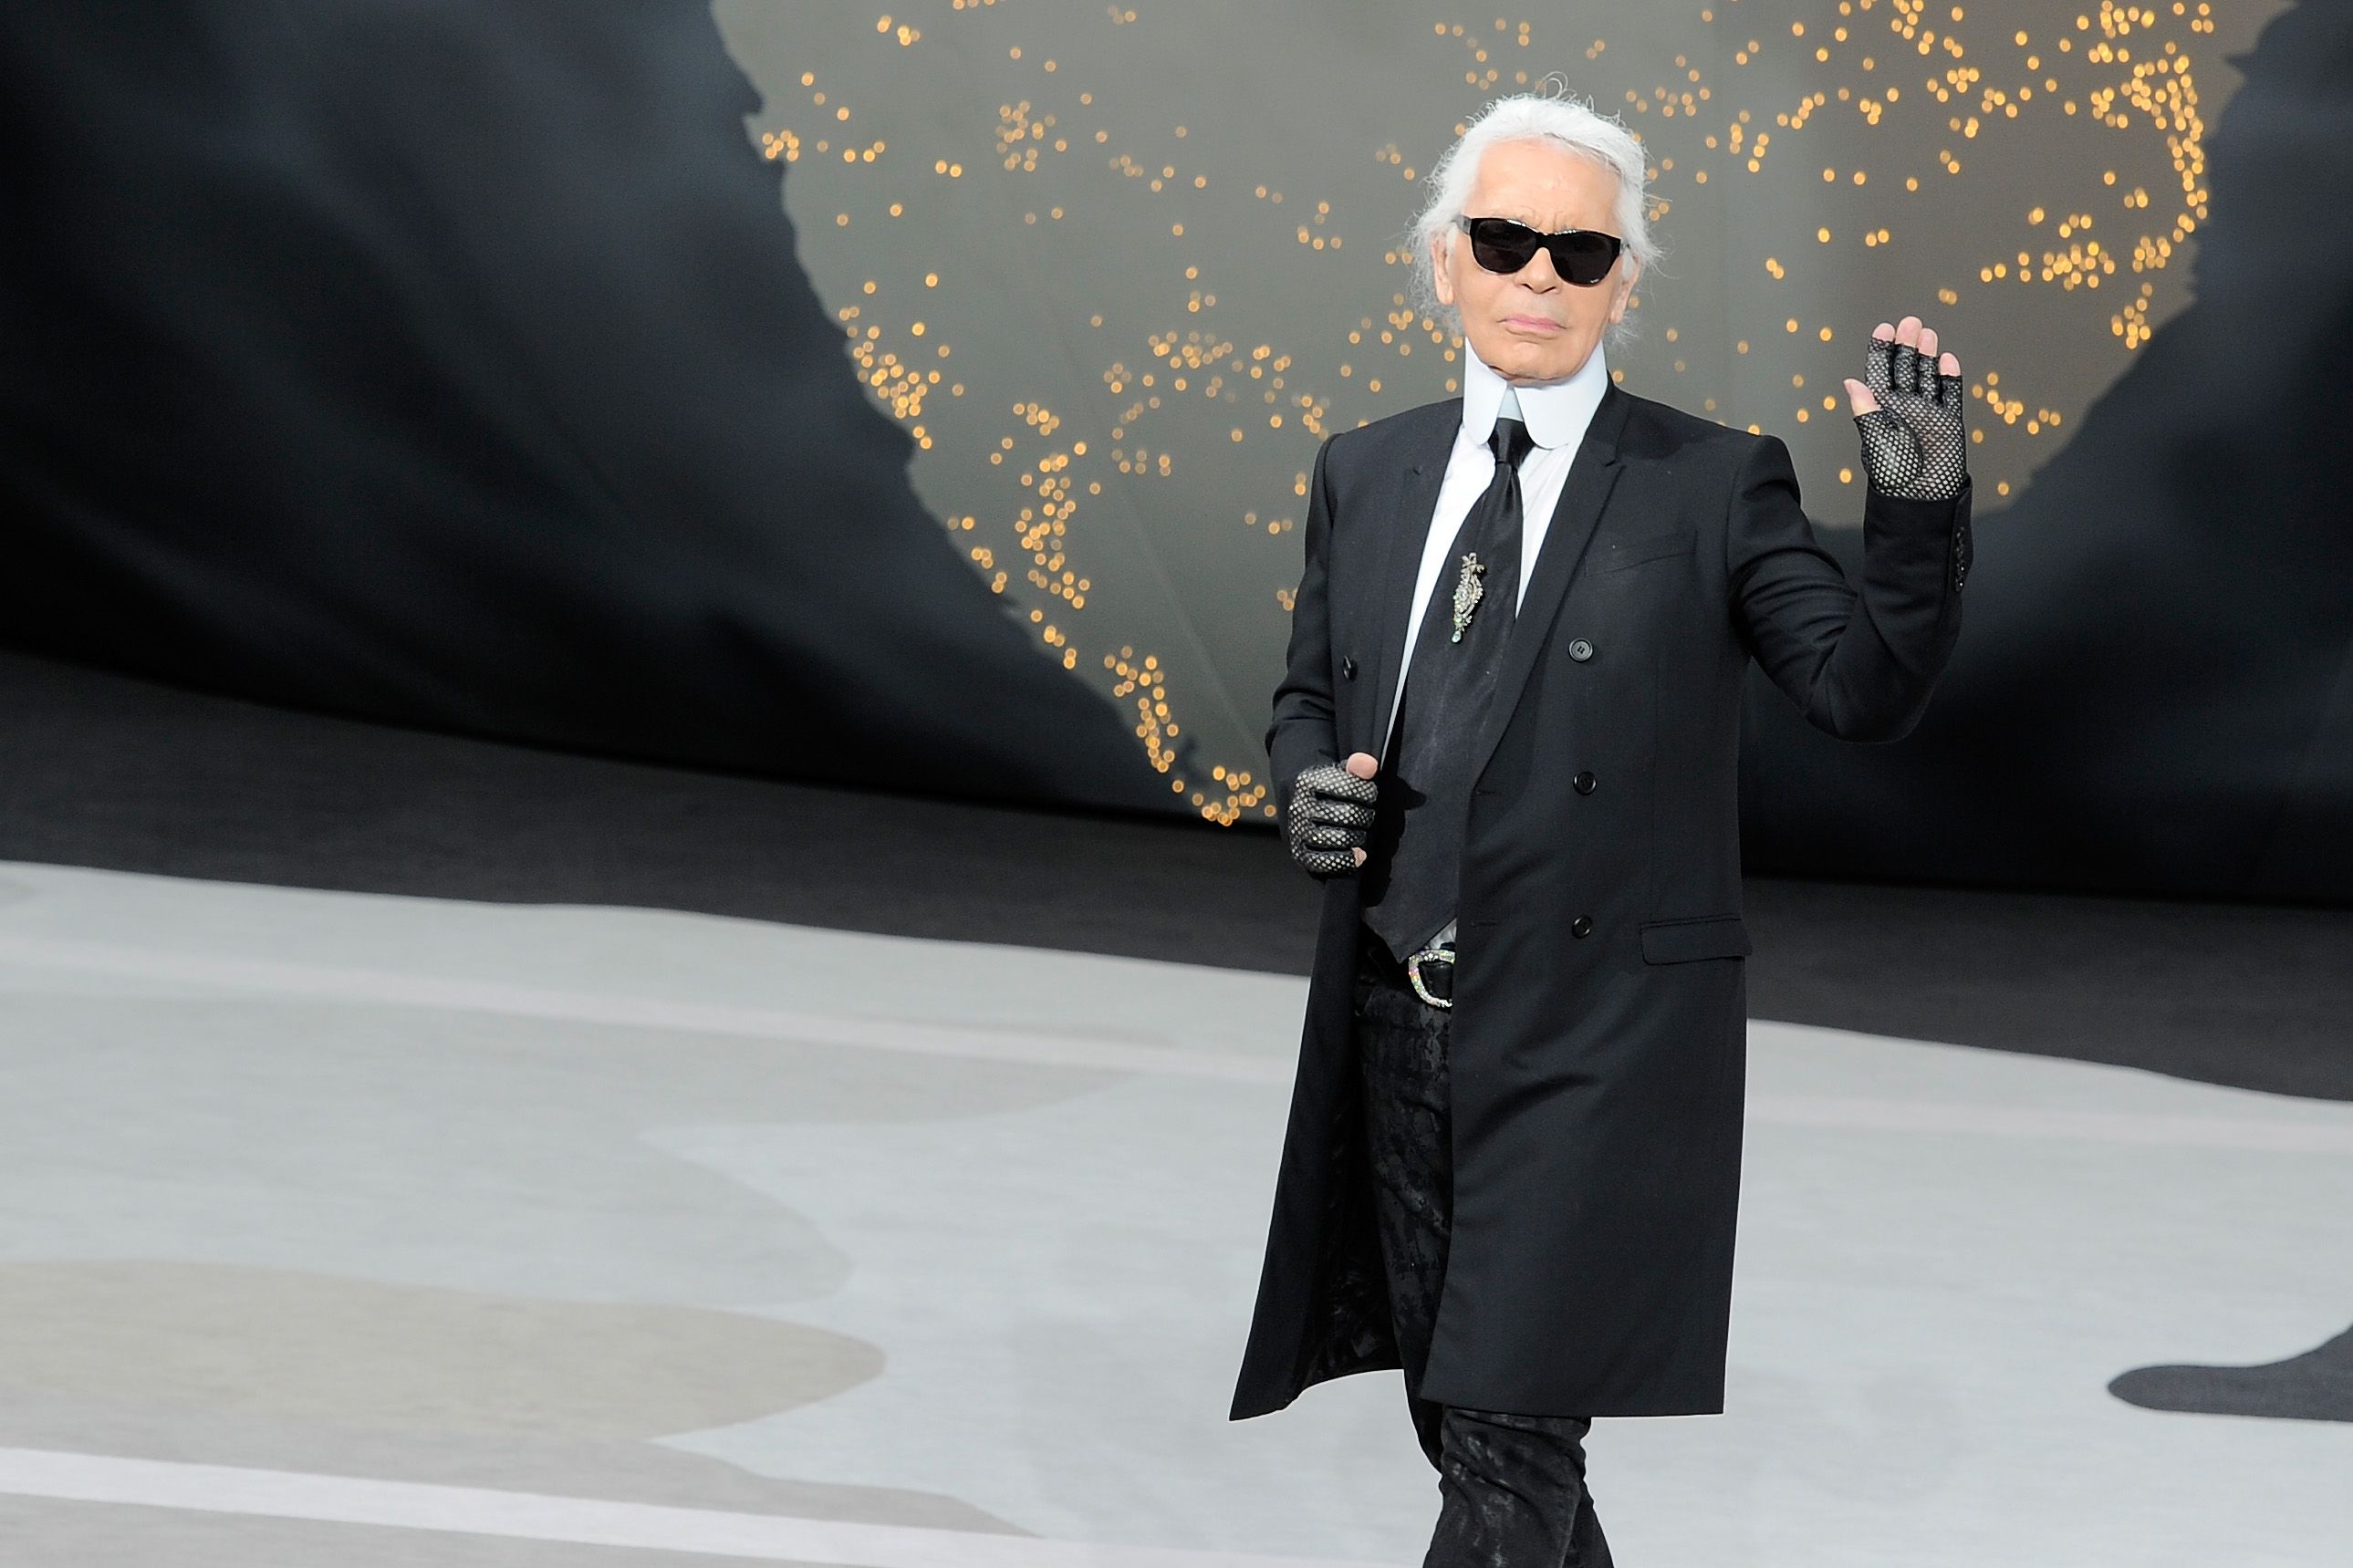 Karl Lagerfeld Interview - Karl Lagerfeld Lived With No Regrets